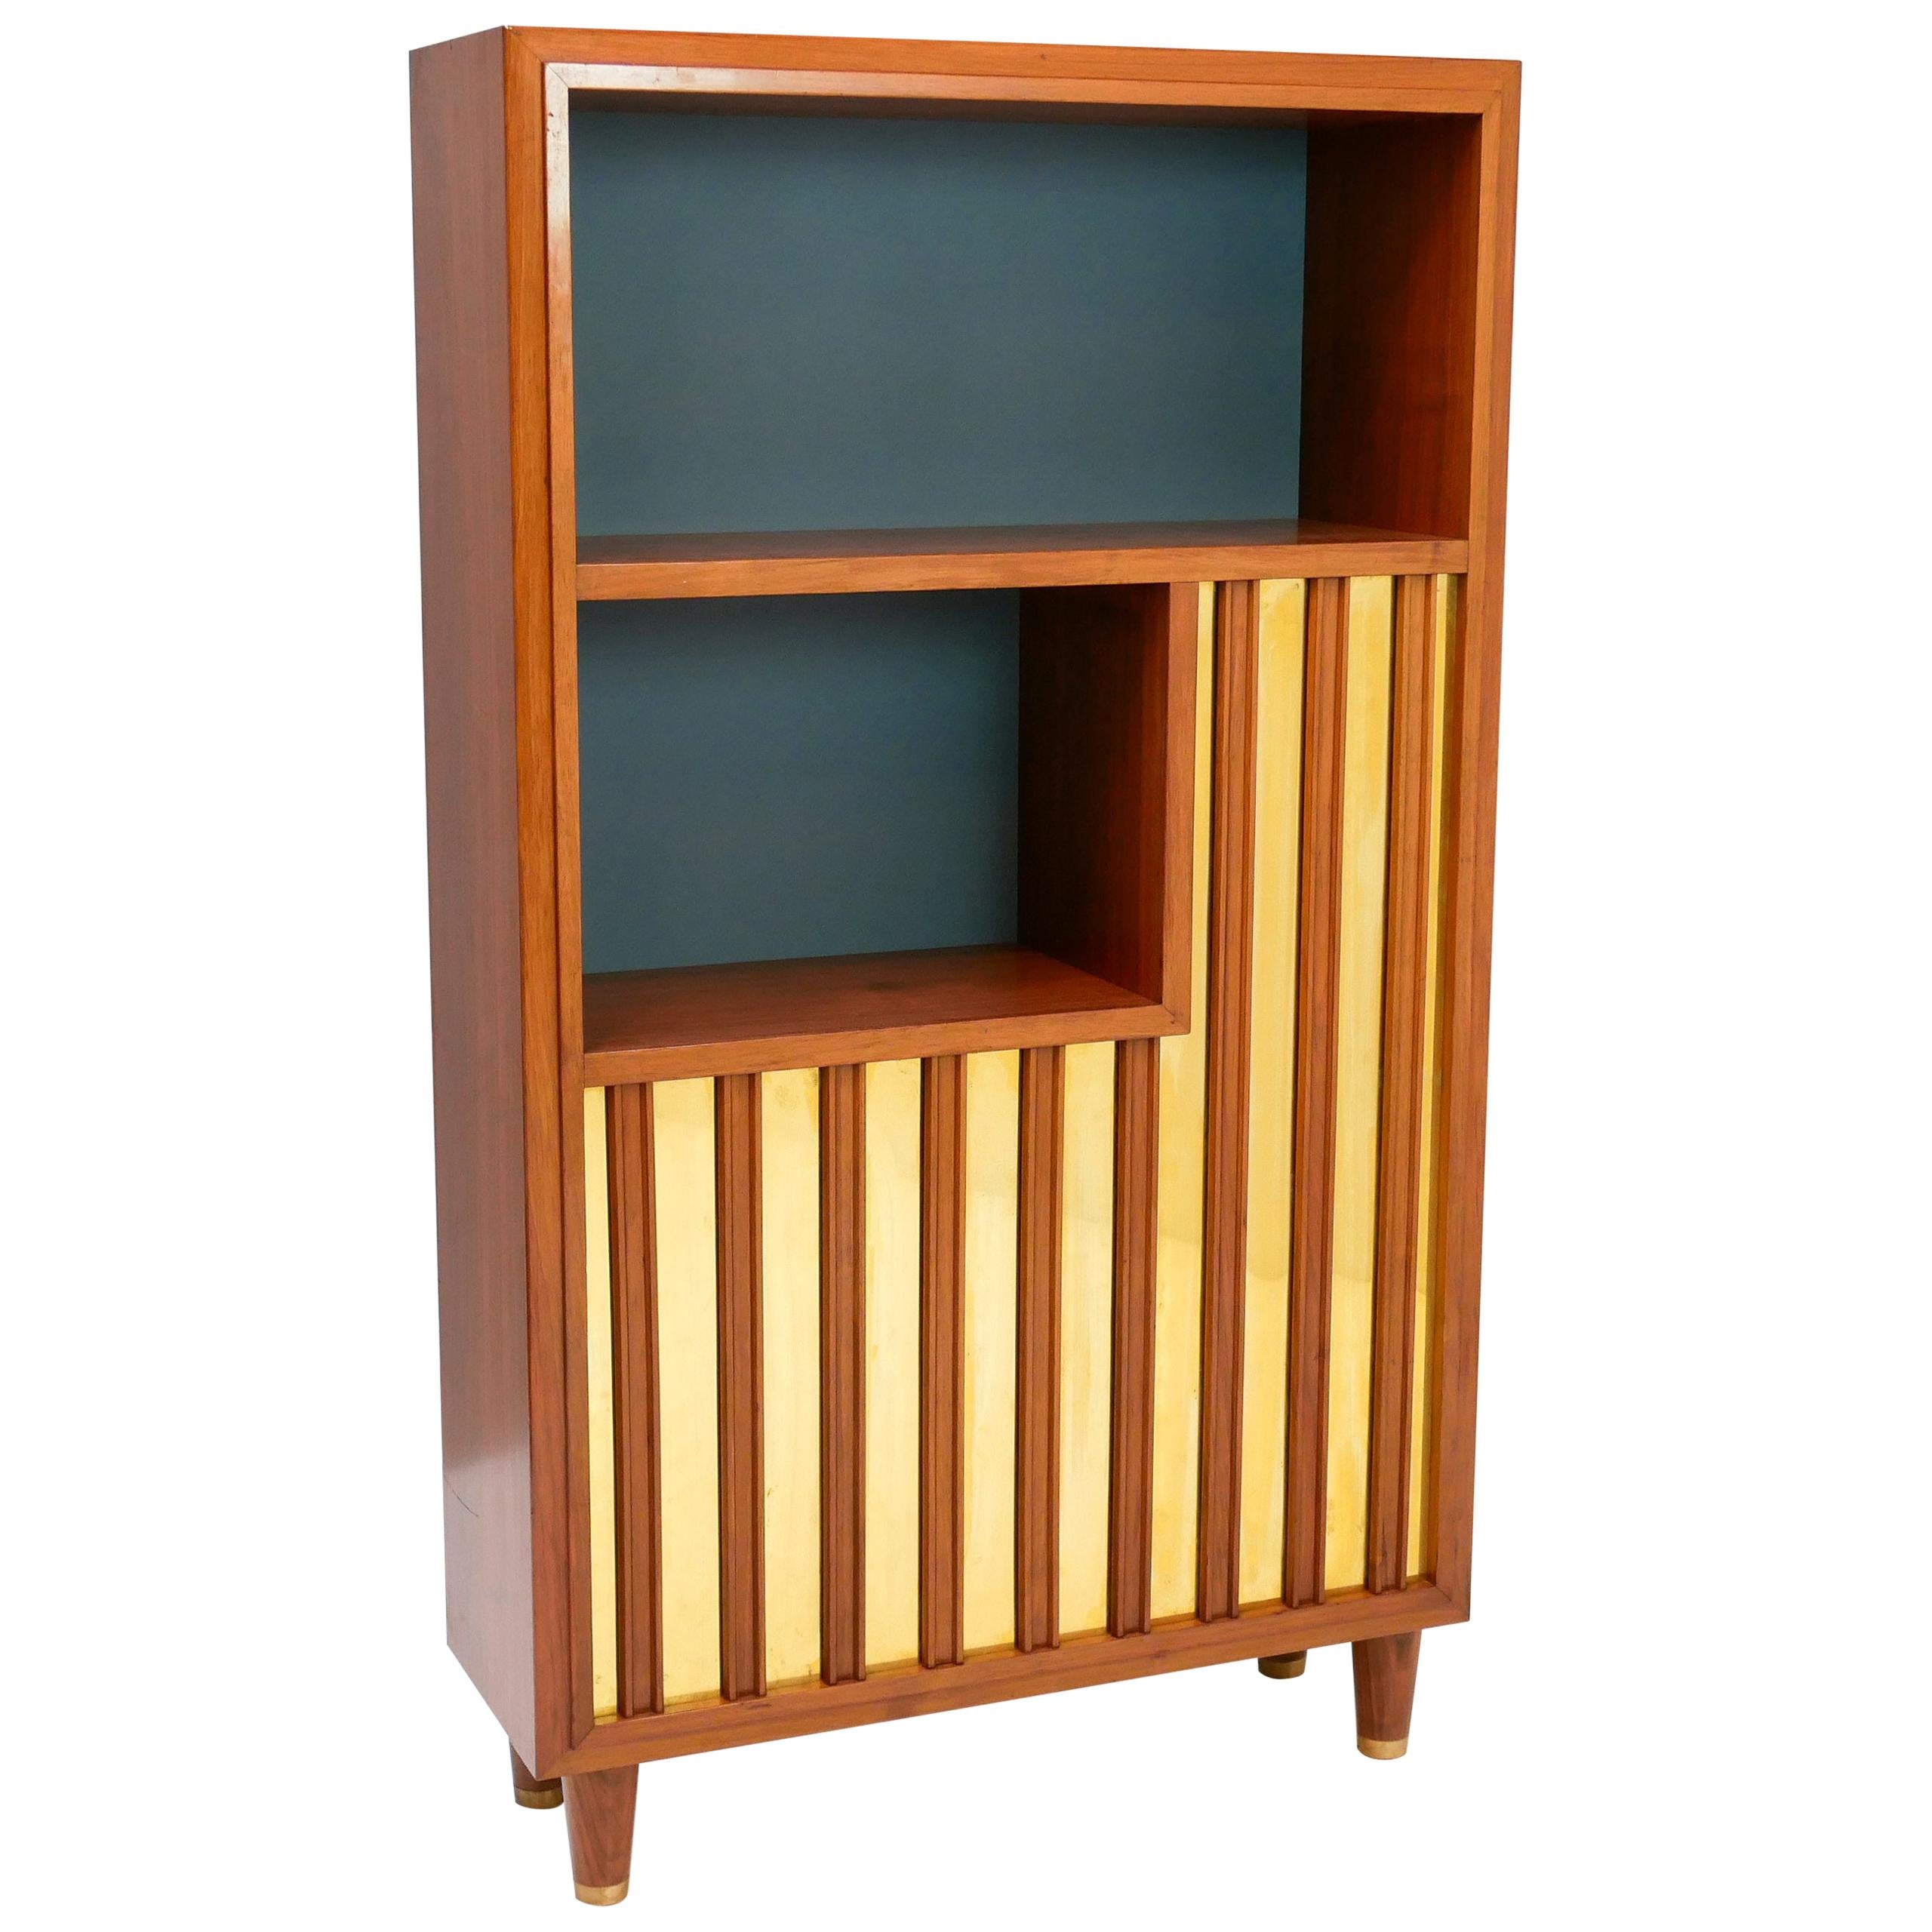 Bookcase/ Decorative Storage, Swedish Modern with Relief Front, 1940s For Sale